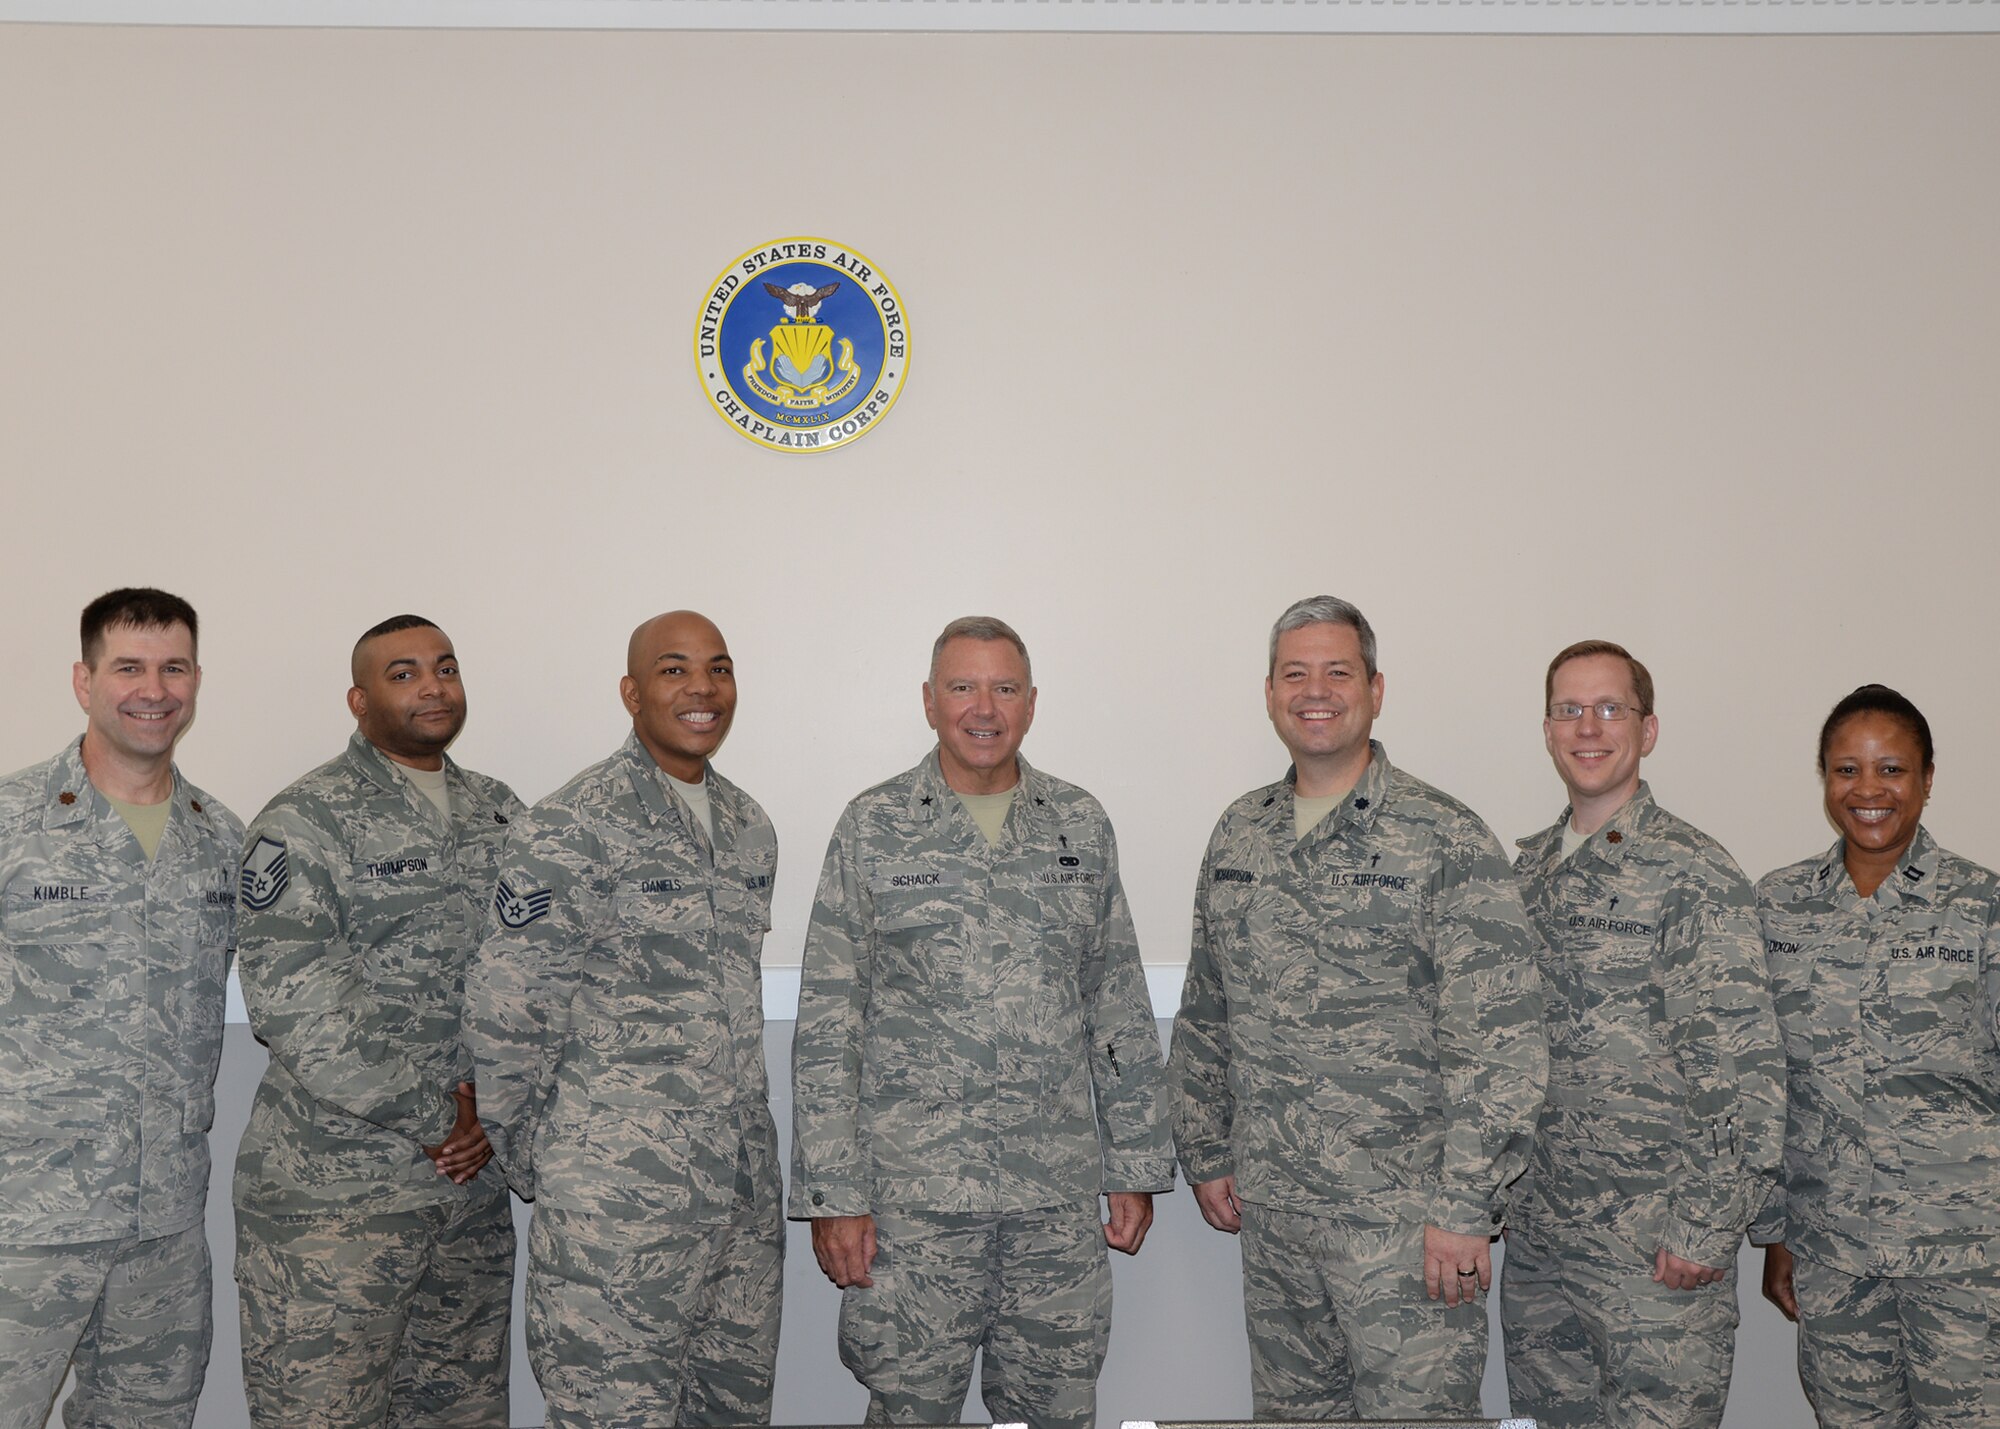 The 14th Flying Training Wing Chapel team stands with Chaplain (Brig. Gen.) Schiack, Deputy Chief of Chaplains, April 19, 2017, at Columbus Air Force Base, Mississippi.
Schiack originally enlisted to serve four years then go to college, however he took the opportunity to commission as a chaplain. (U.S. Air Force photo by Airman 1st Class Beaux Hebert)